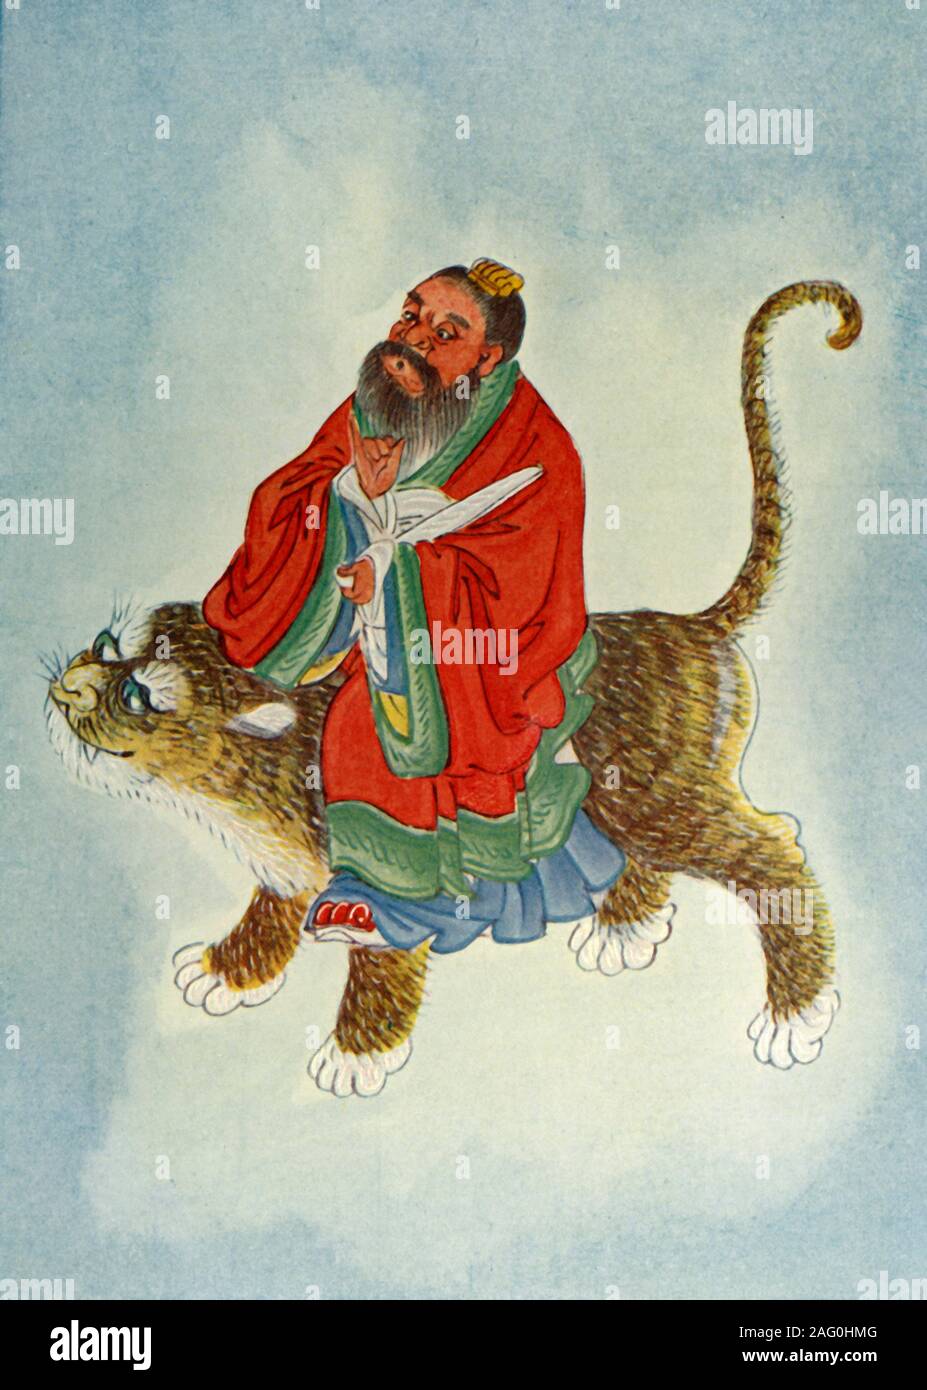 'Chang Tao-Ling', 1922. Chang Tao-Ling (34-156) Founder of the Han Dynasty Taoist school of wu-tou-mi tao, Way of the Celestial Masters, which emphasized the connection between sin and suffering, and introduced repentance and healing, sometimes pictured riding a tiger. From &quot;Myths and Legends of China&quot;, by E. T. C. Werner. [George G. Harrap &amp; Co. Ltd., London, Calcutta, Sydney, 1922] Stock Photo